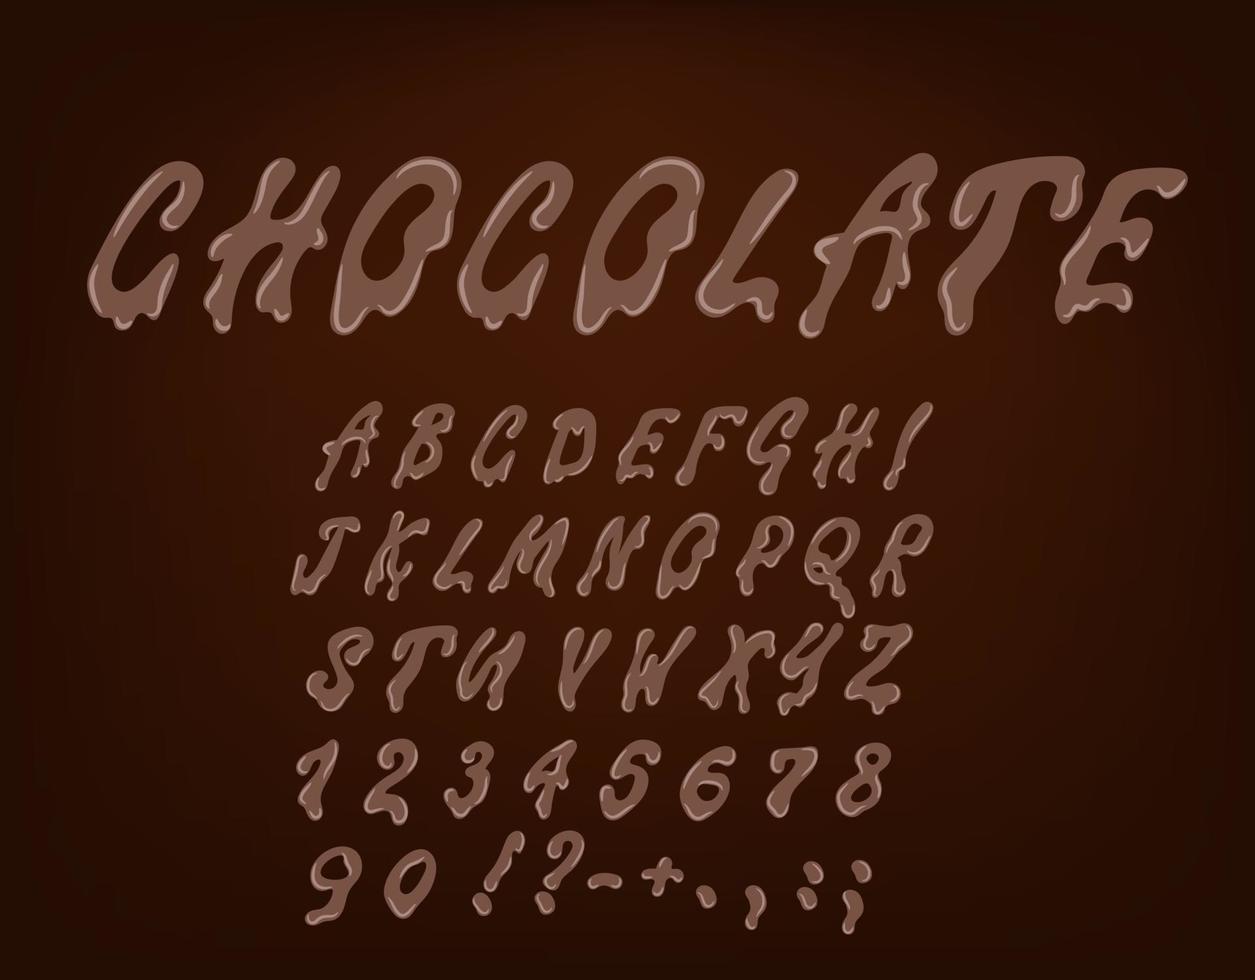 Hand drawn latin alphabet made of dark melted chocolate. Sweet food packaging font vector